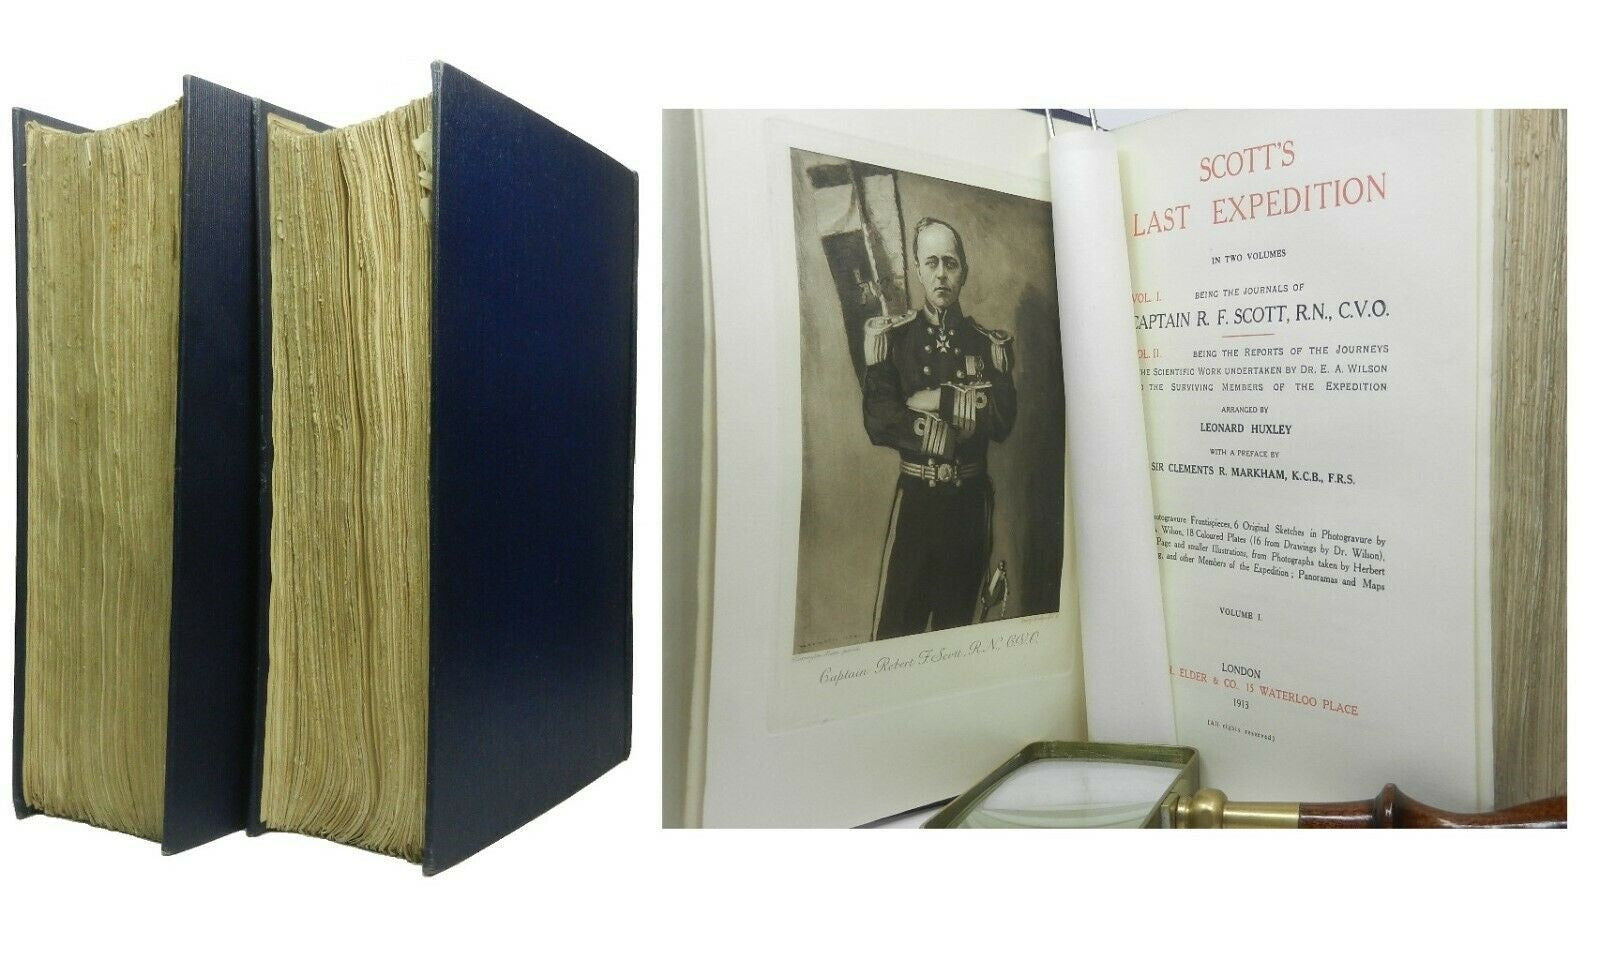 CAPTAIN R. F. SCOTT'S LAST EXPEDITION IN TWO VOLUMES, 1913 FIRST EDITION SET